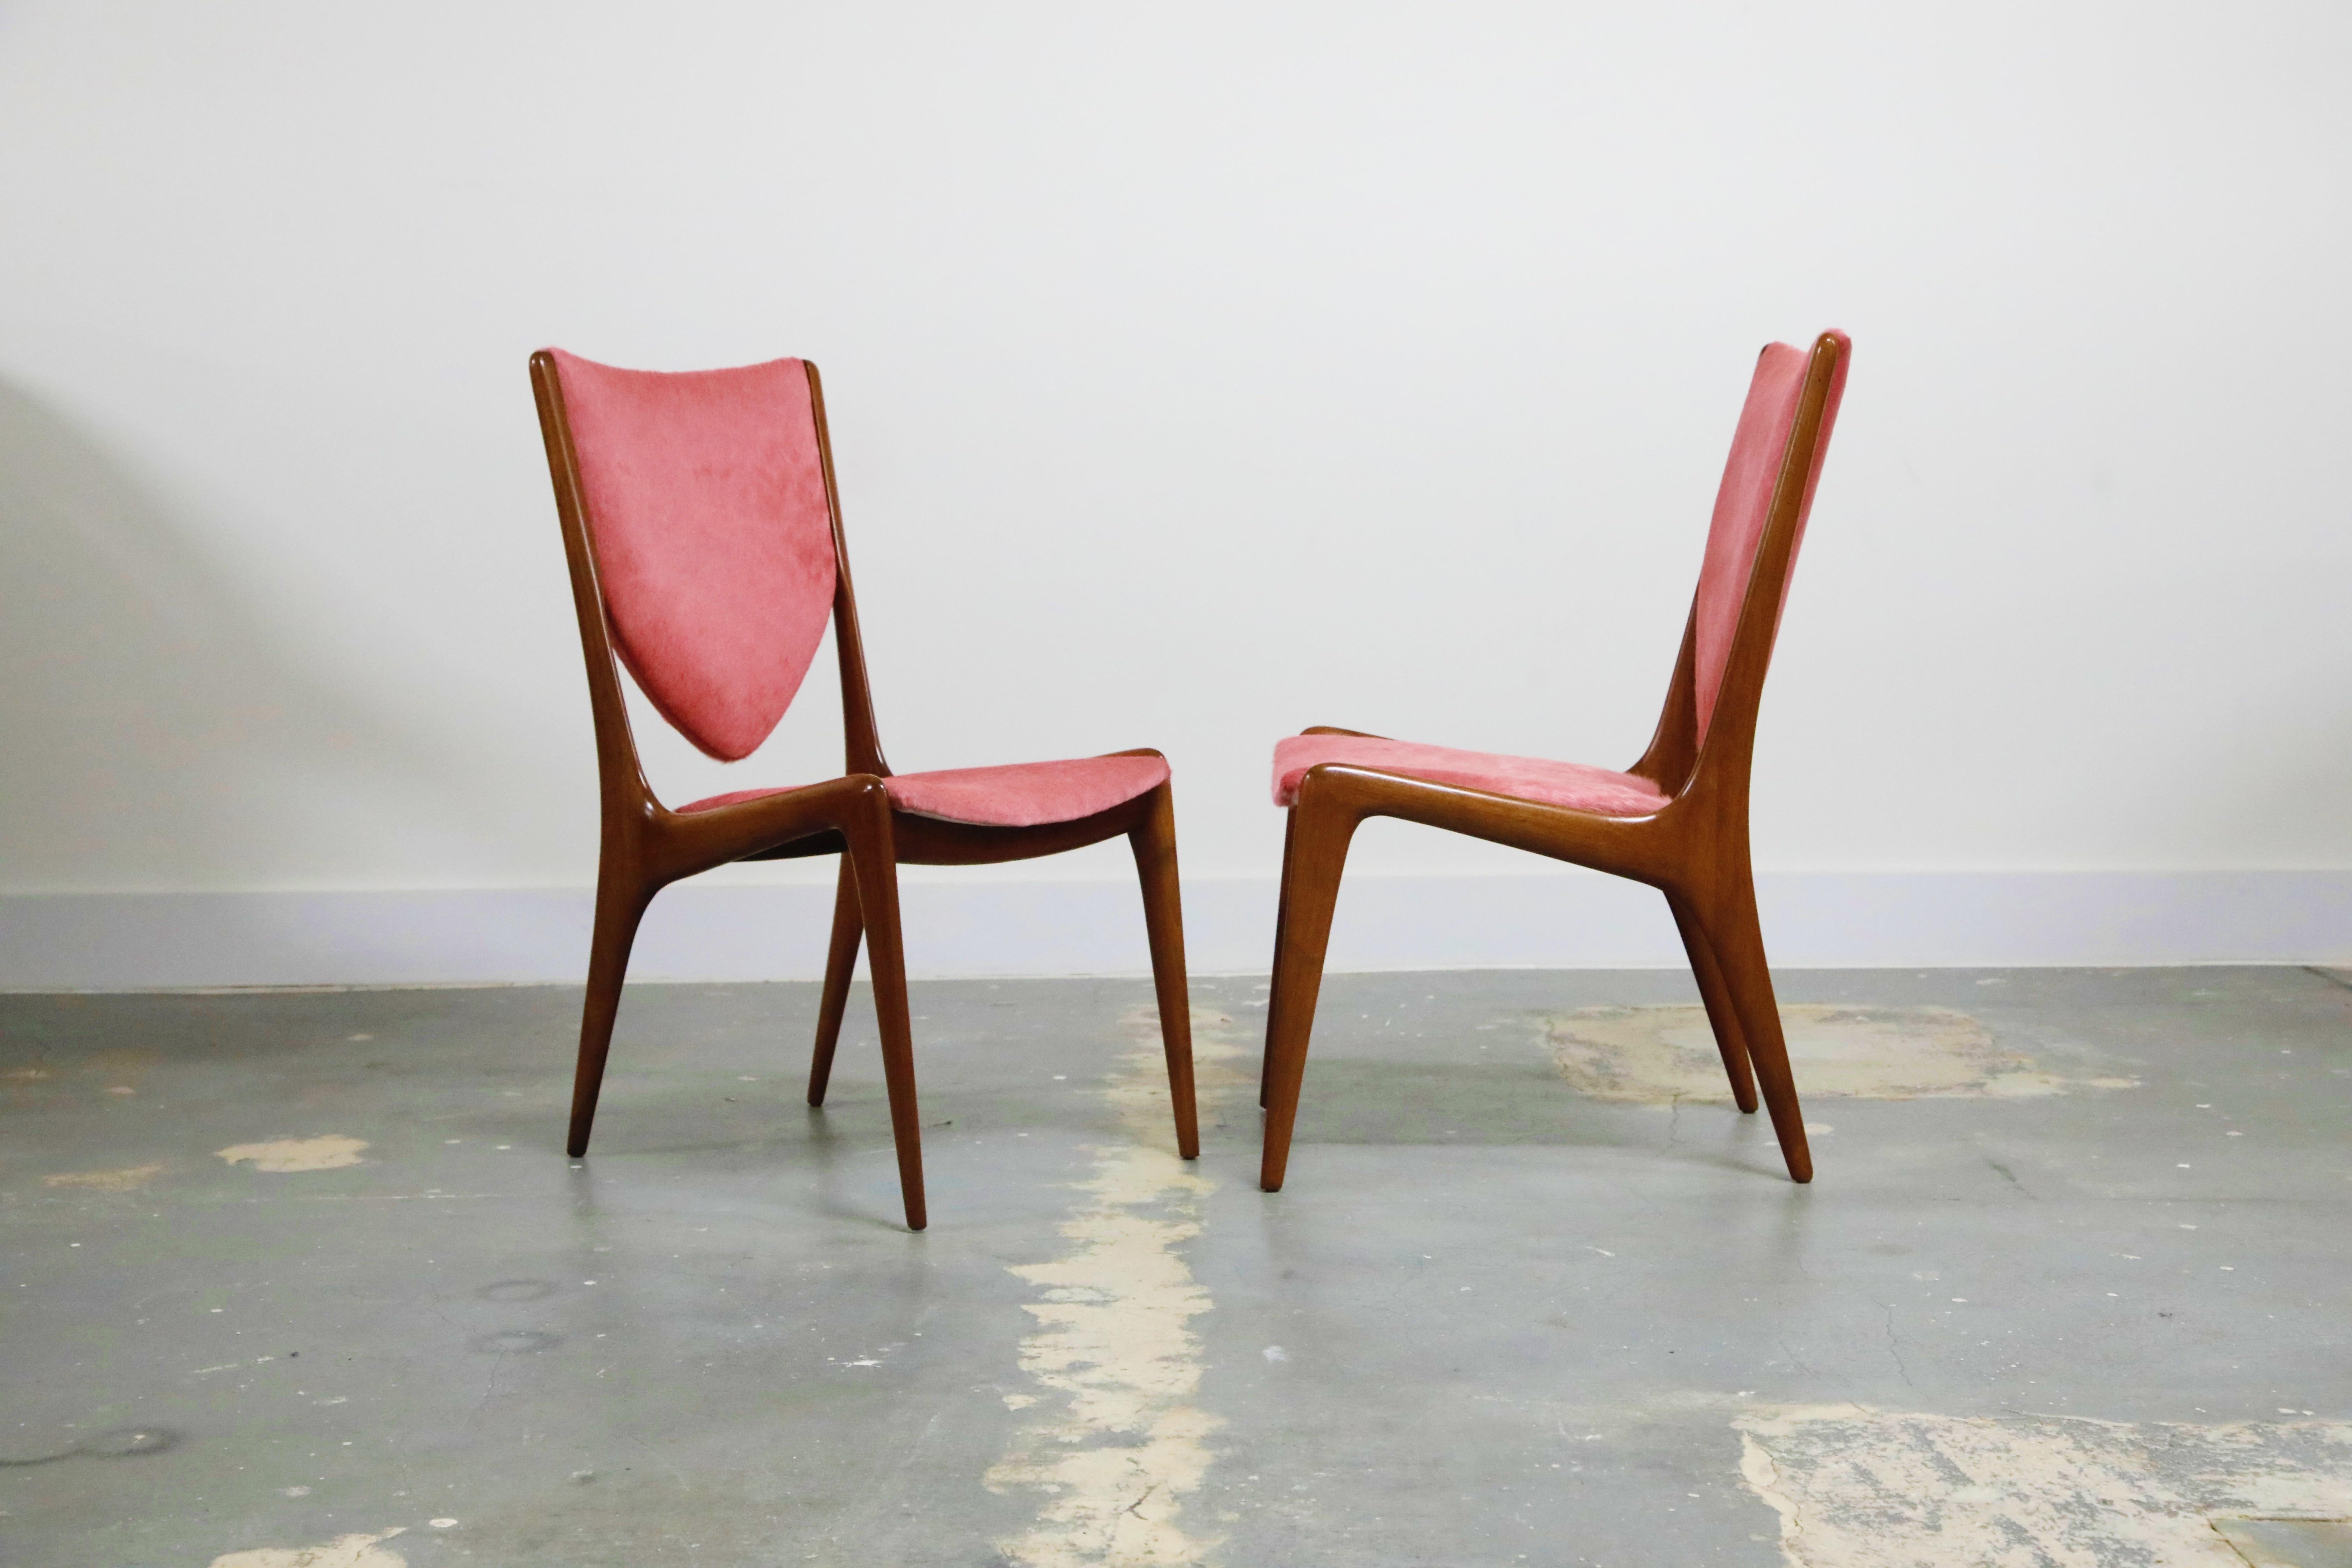 Attention those who want the absolute best of the best of the best, your chairs have arrived. This pair of very rare and highly sought-after model #VK-103 'Shield Back' chairs by Vladimir Kagan for Kagan-Dreyfuss is crafted from sculpted walnut and